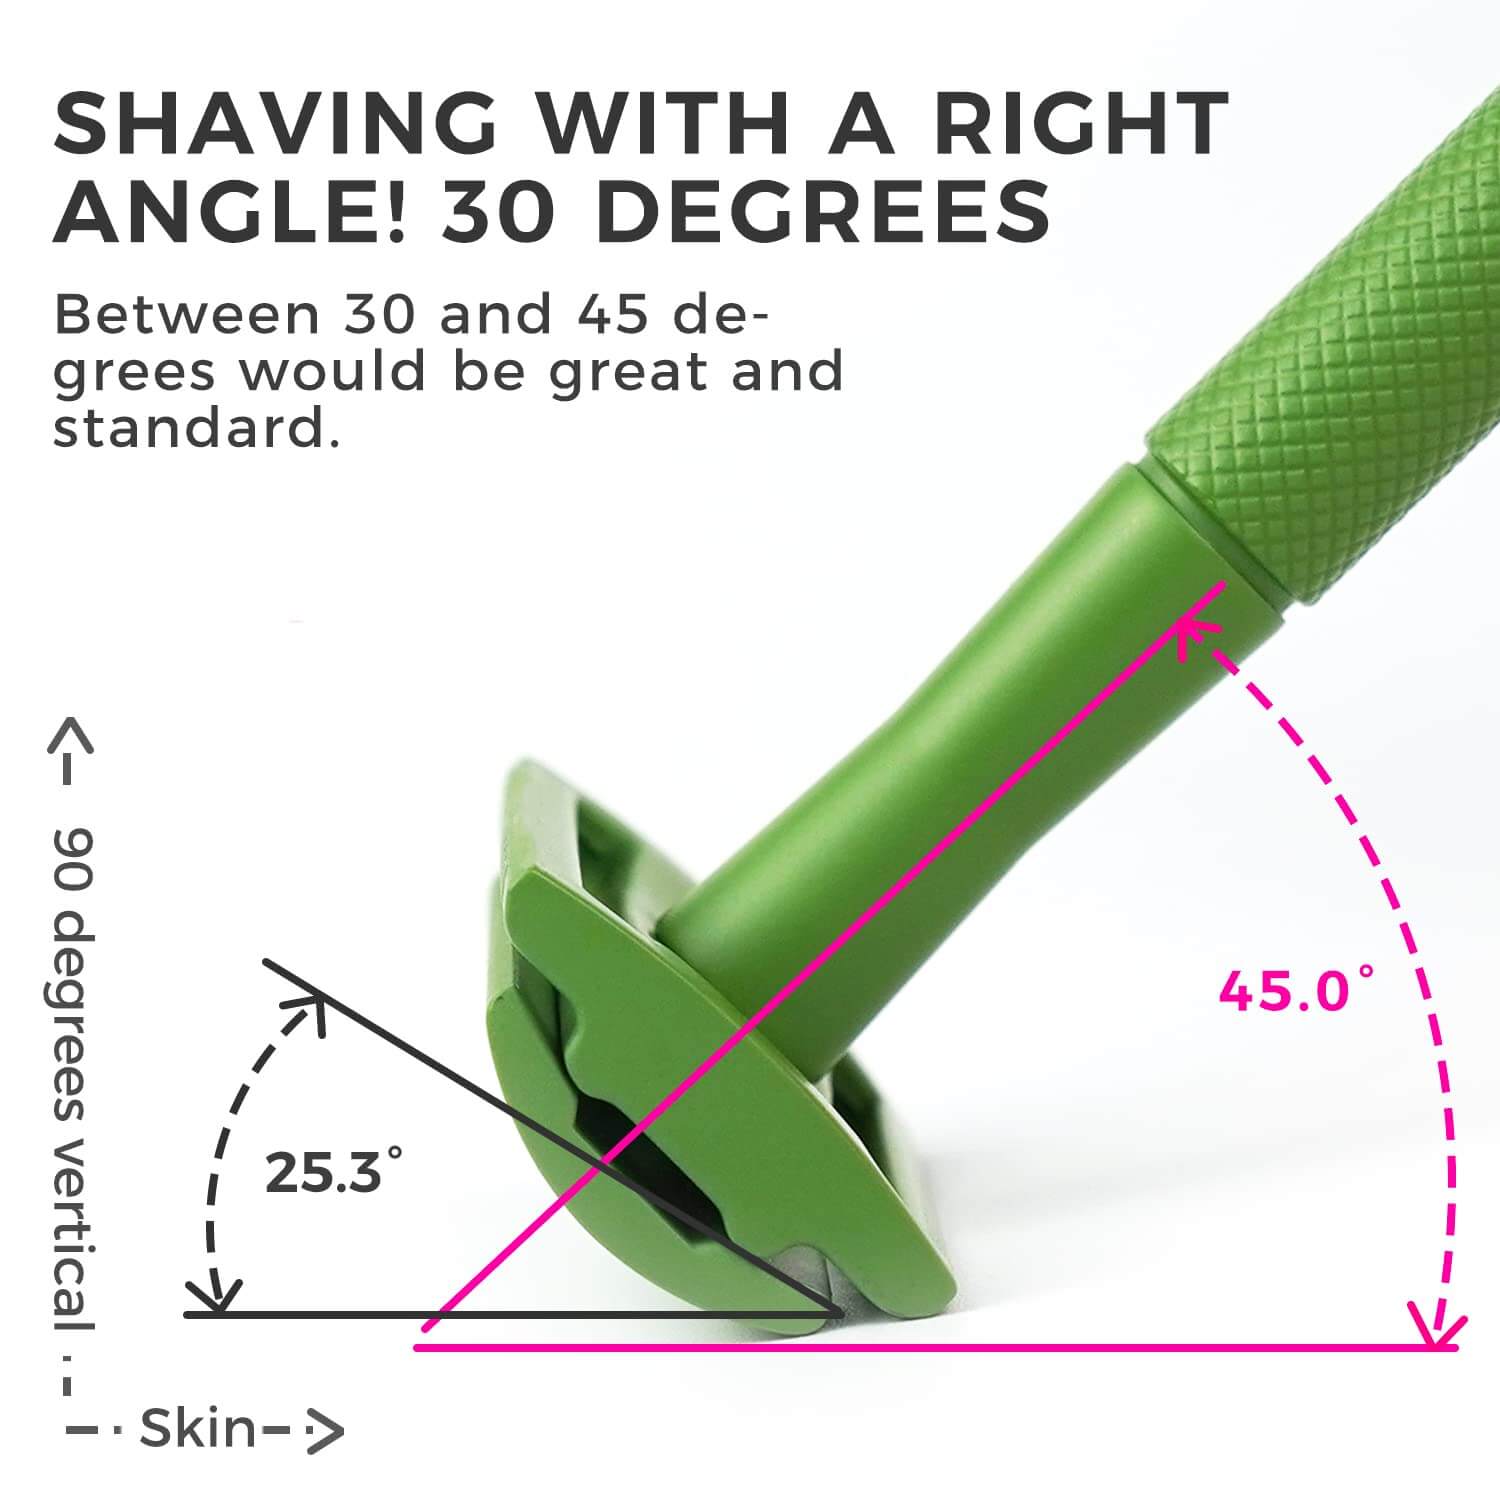 Shaving Between 30 And 45 Degrees Would Be Great And Standard With Use Zomchi Green Safety Razor